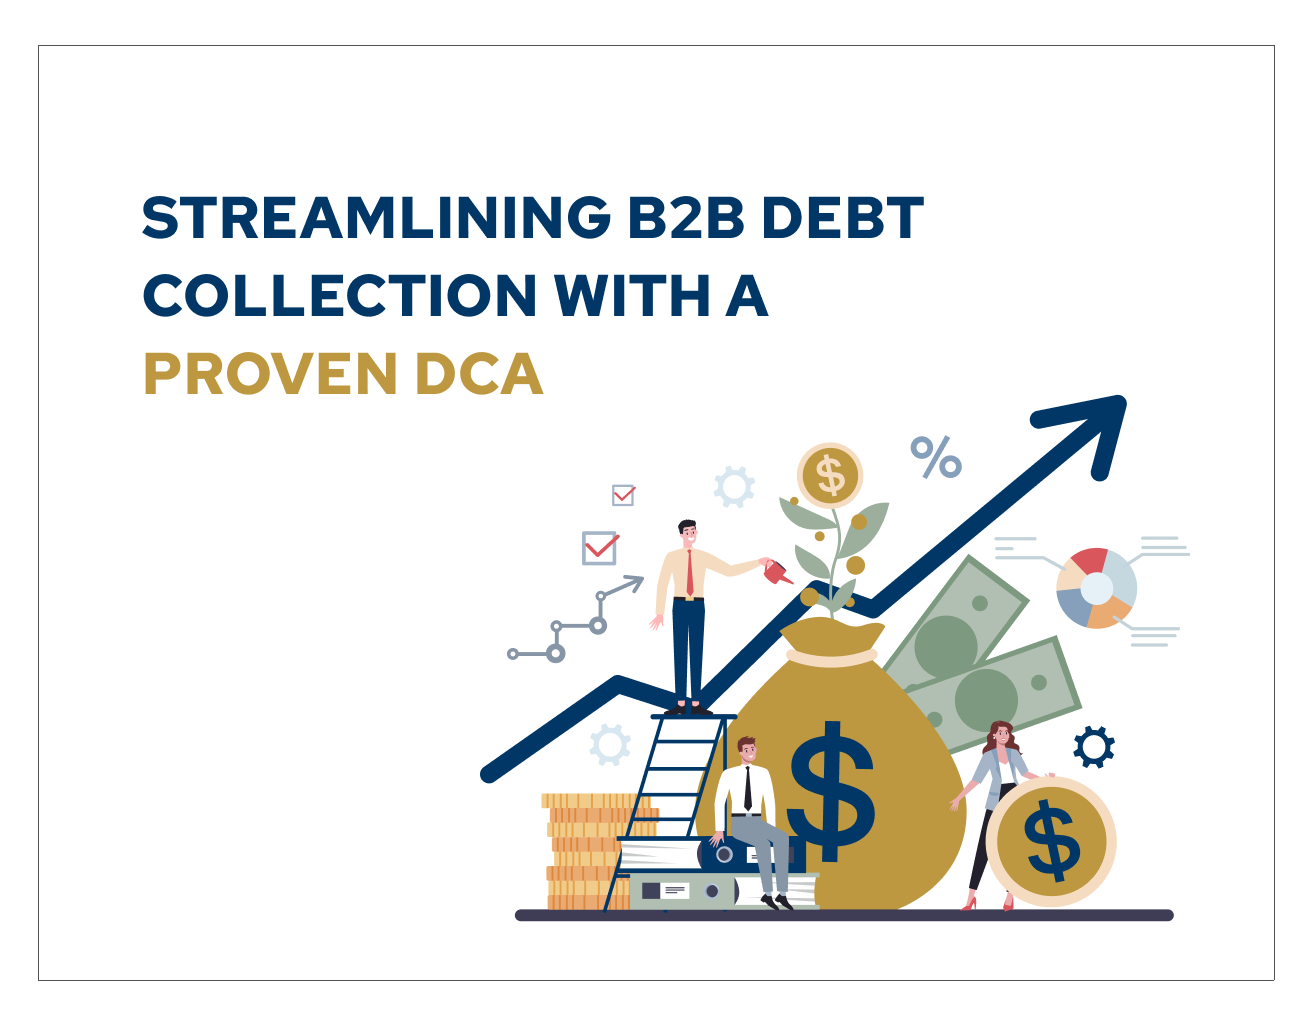 Streamlining B2B Debt Collection with a Proven DCA